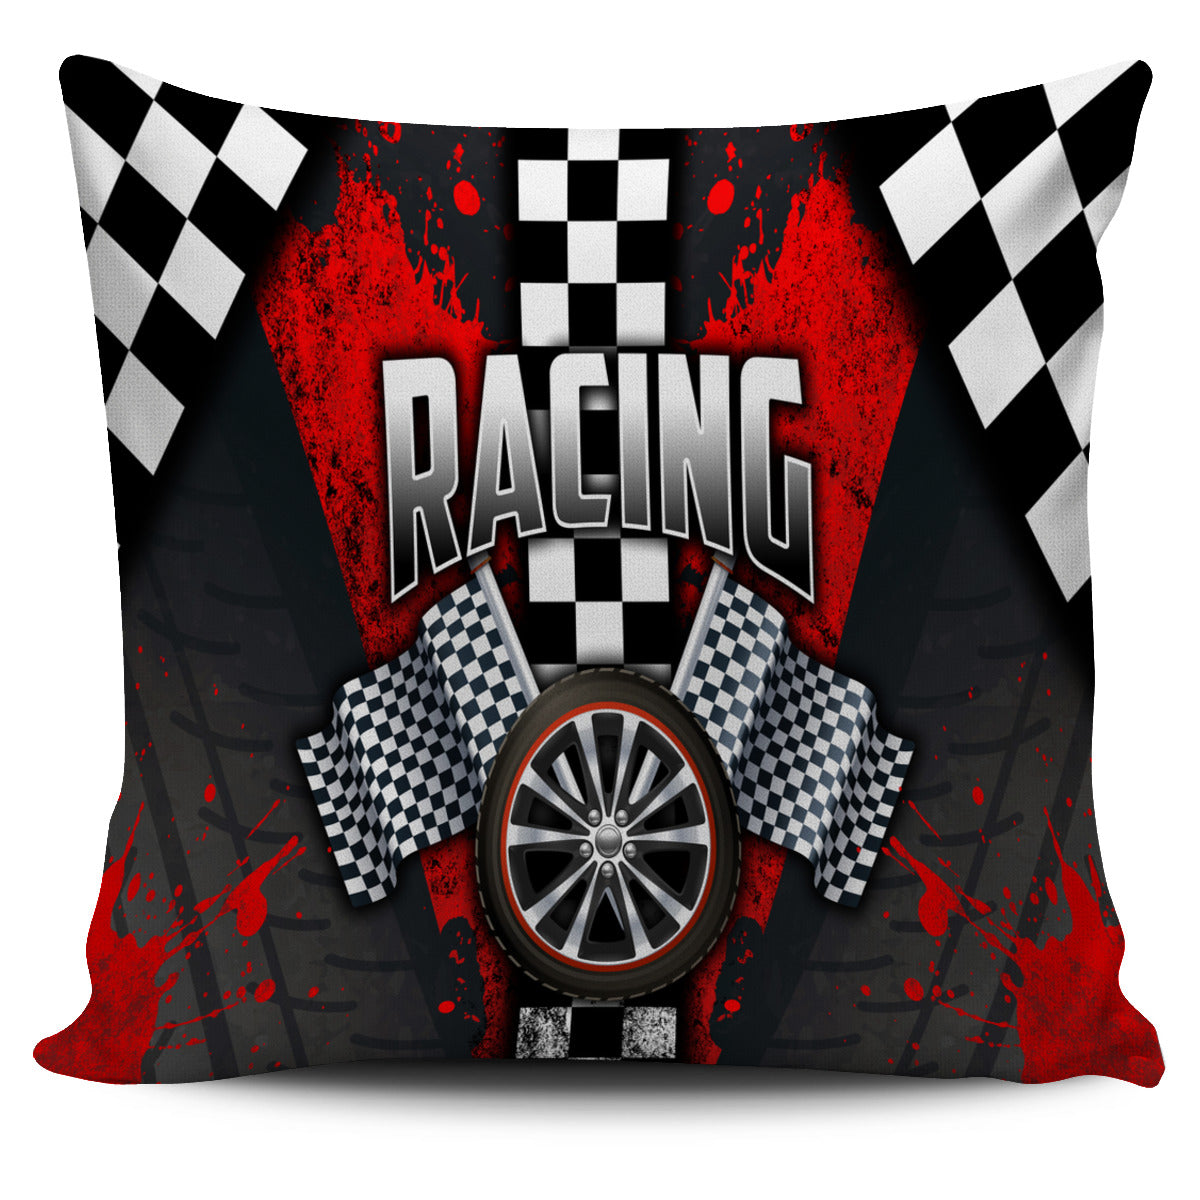 Racing Pillow Cover Red